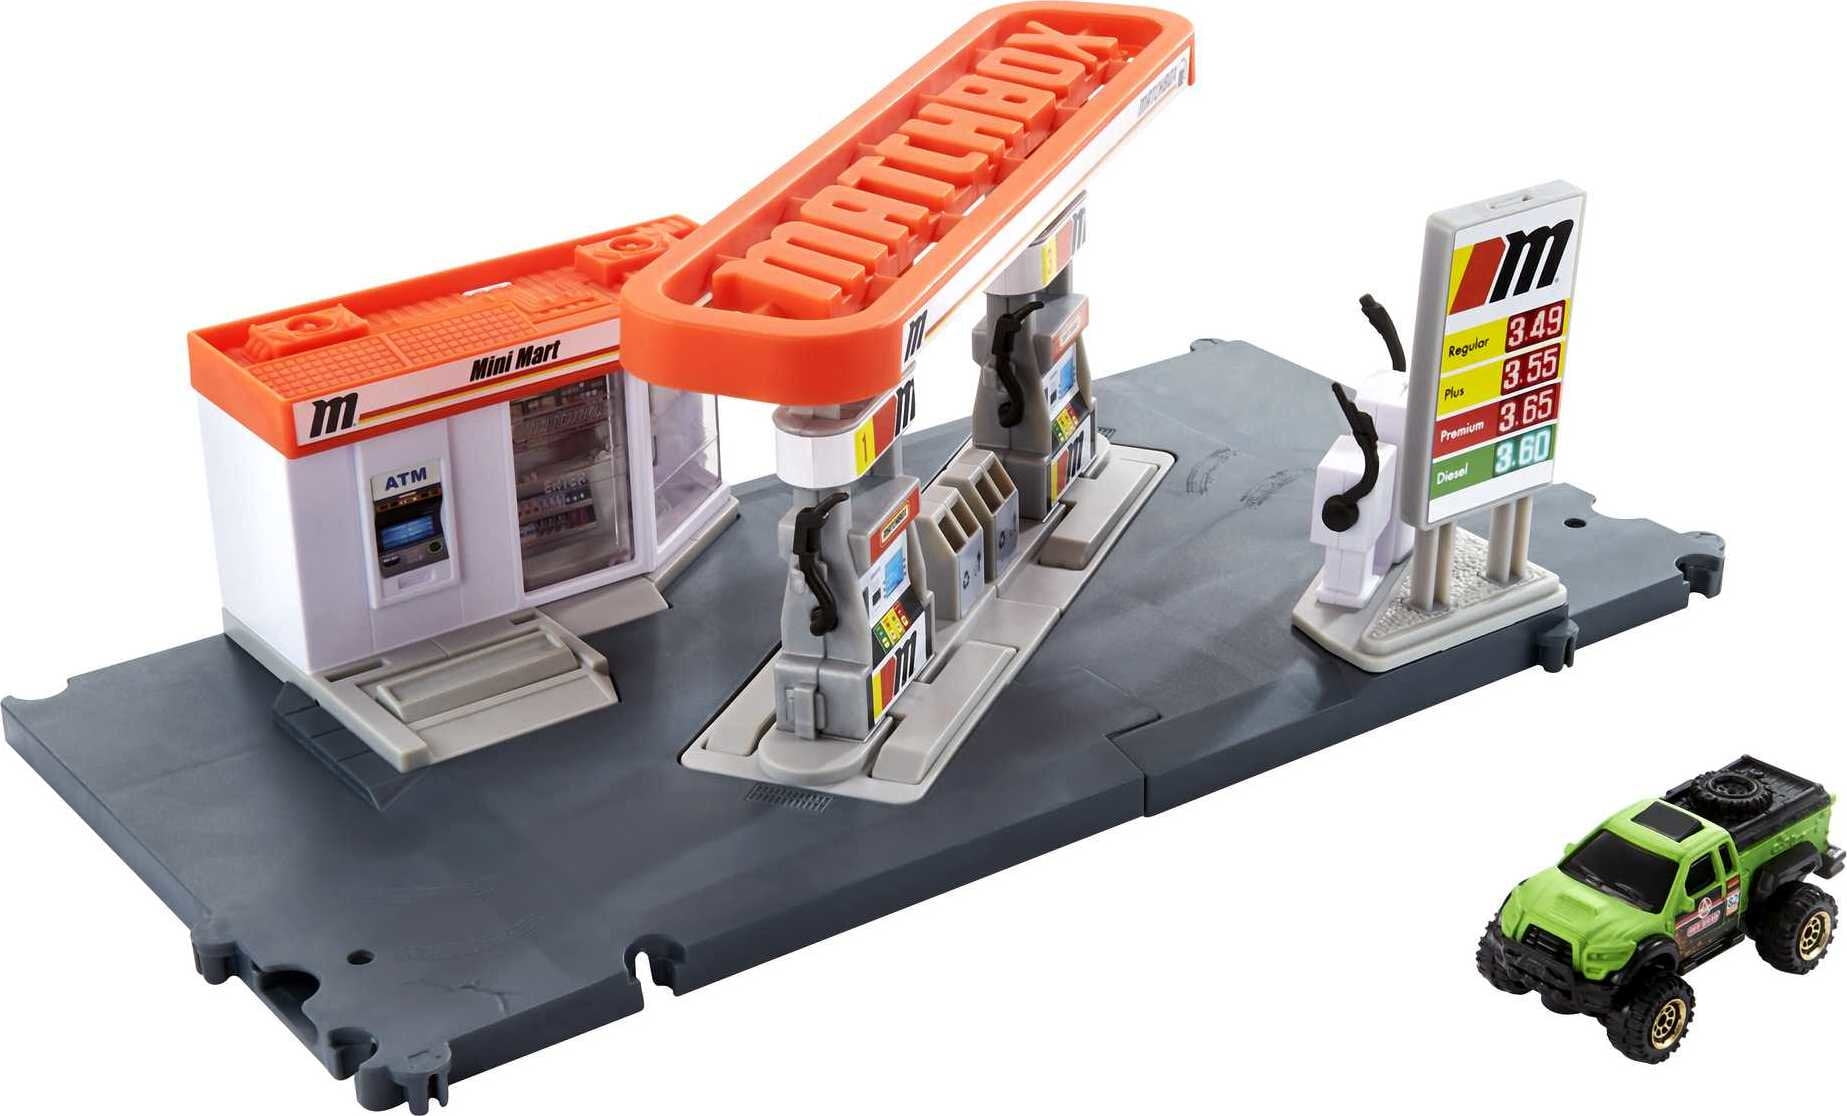 Matchbox Action Drivers Fuel Station Playset with 1:64 Scale Toy Car &  Moving Features 